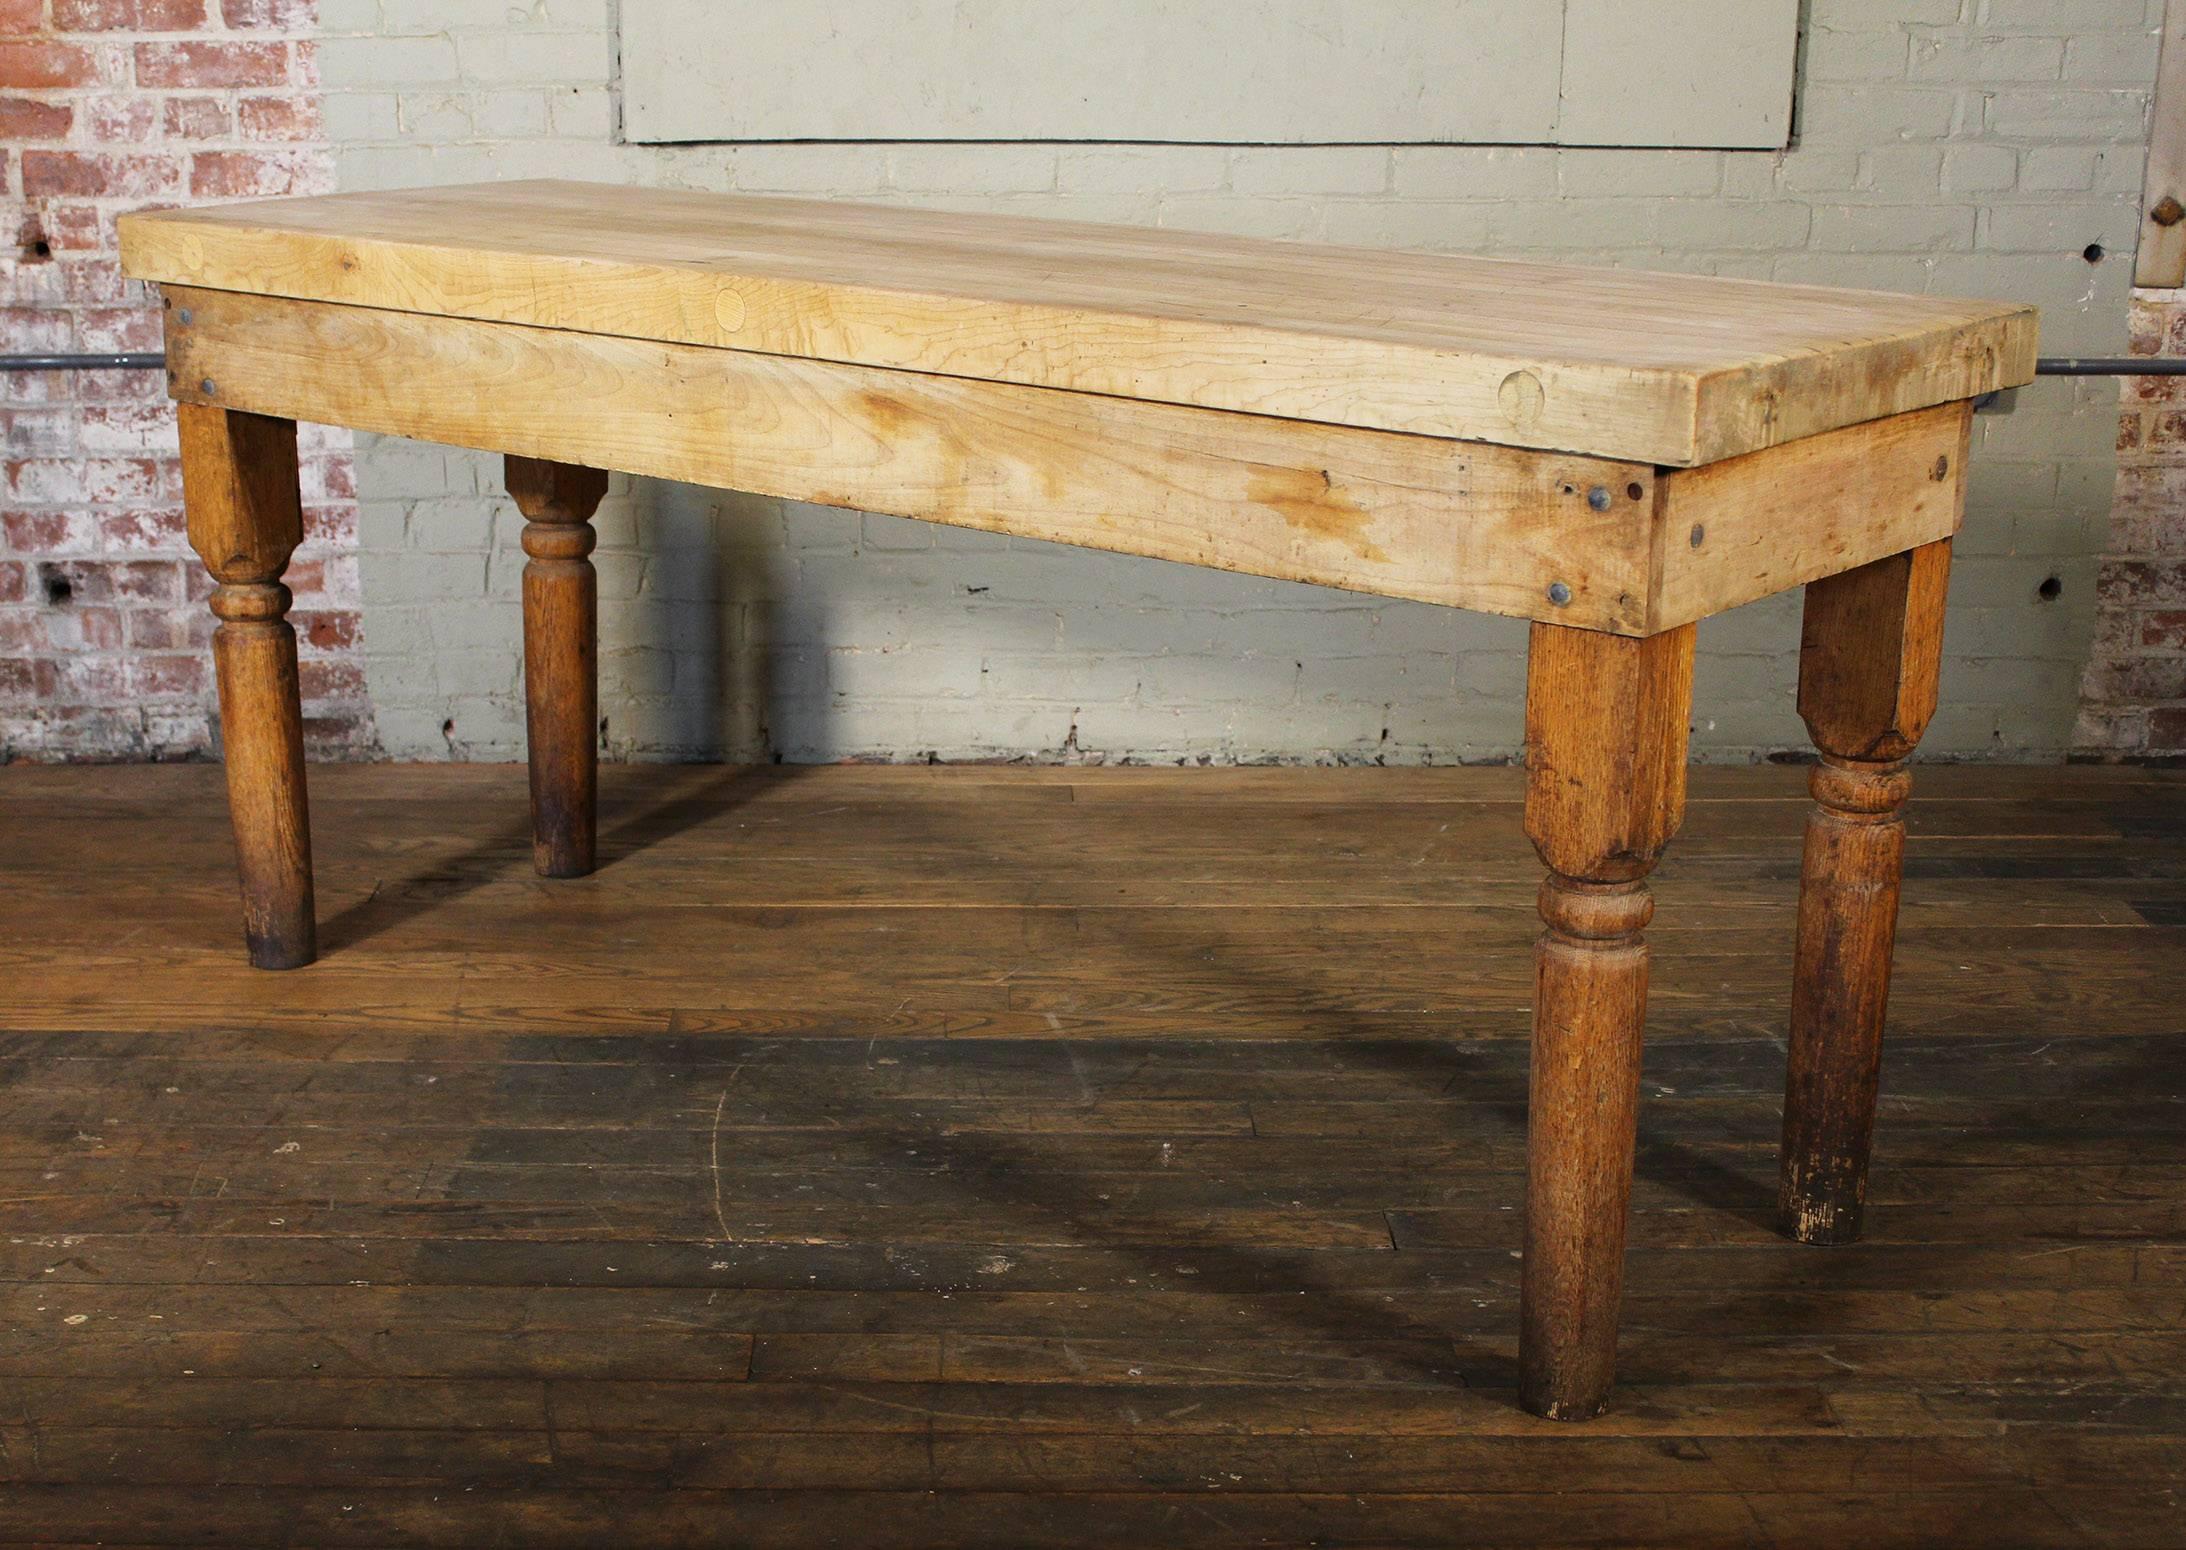 Vintage wood turned leg large butcher block table. Overall Dimensions: 72 1/8